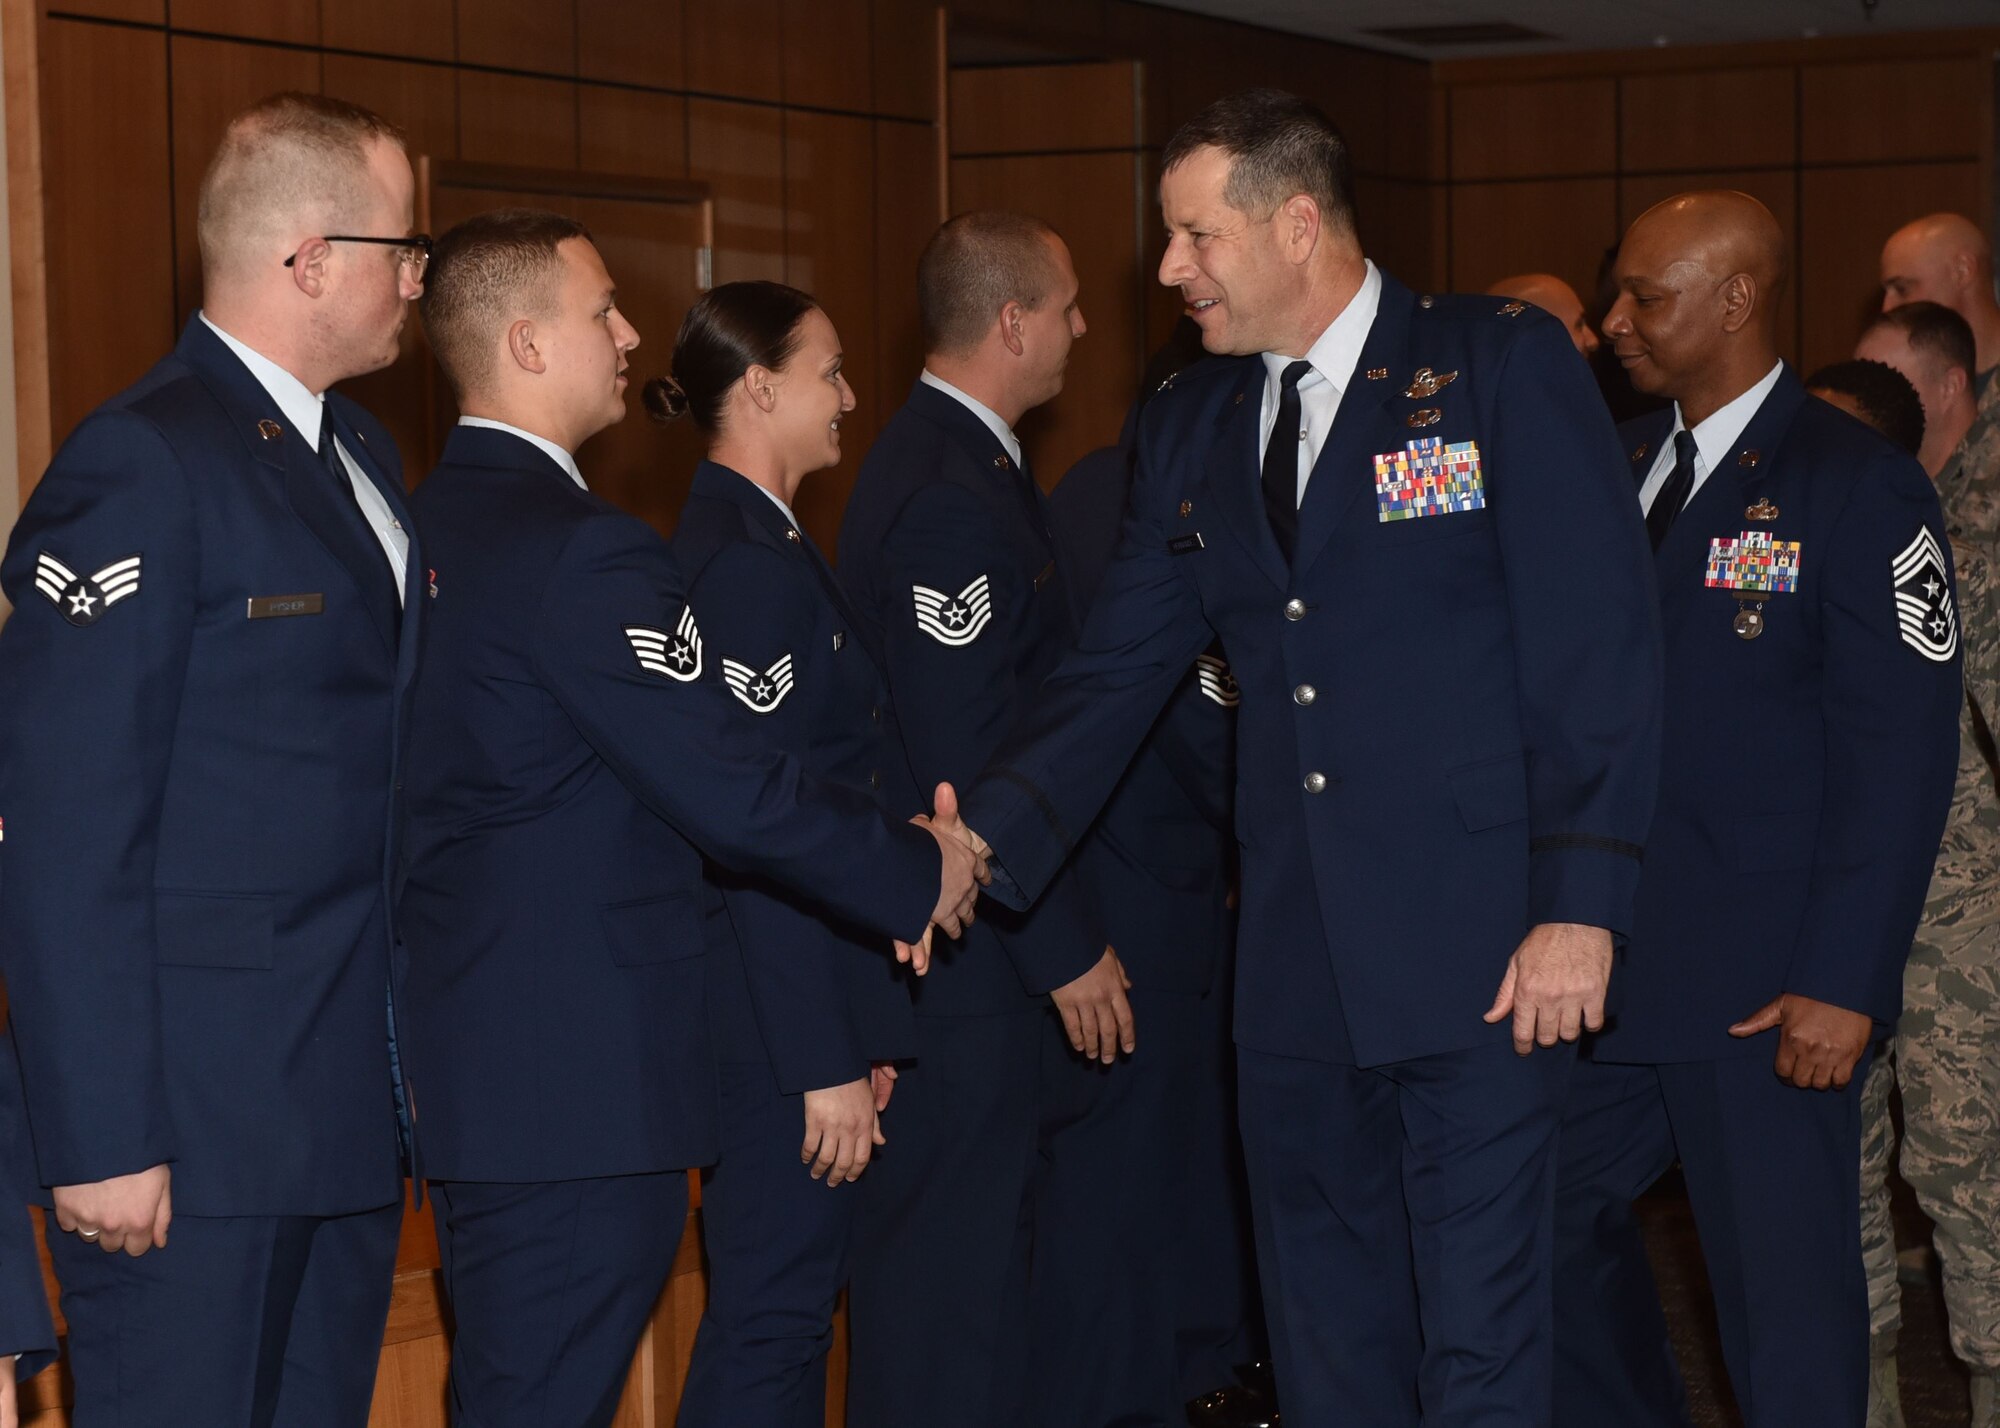 U.S. Air Force Col. Michael Hernandez, 325th Fighter Wing commander, congratulates Tyndall’s newest enlisted promotees during the January promotion ceremony at the Horizons Community Center, Jan. 5, 2018. The monthly promotion ceremony honors Airmen receiving a new rank. (U.S. Air Force photo by Senior Airman Sergio Gamboa/Released)